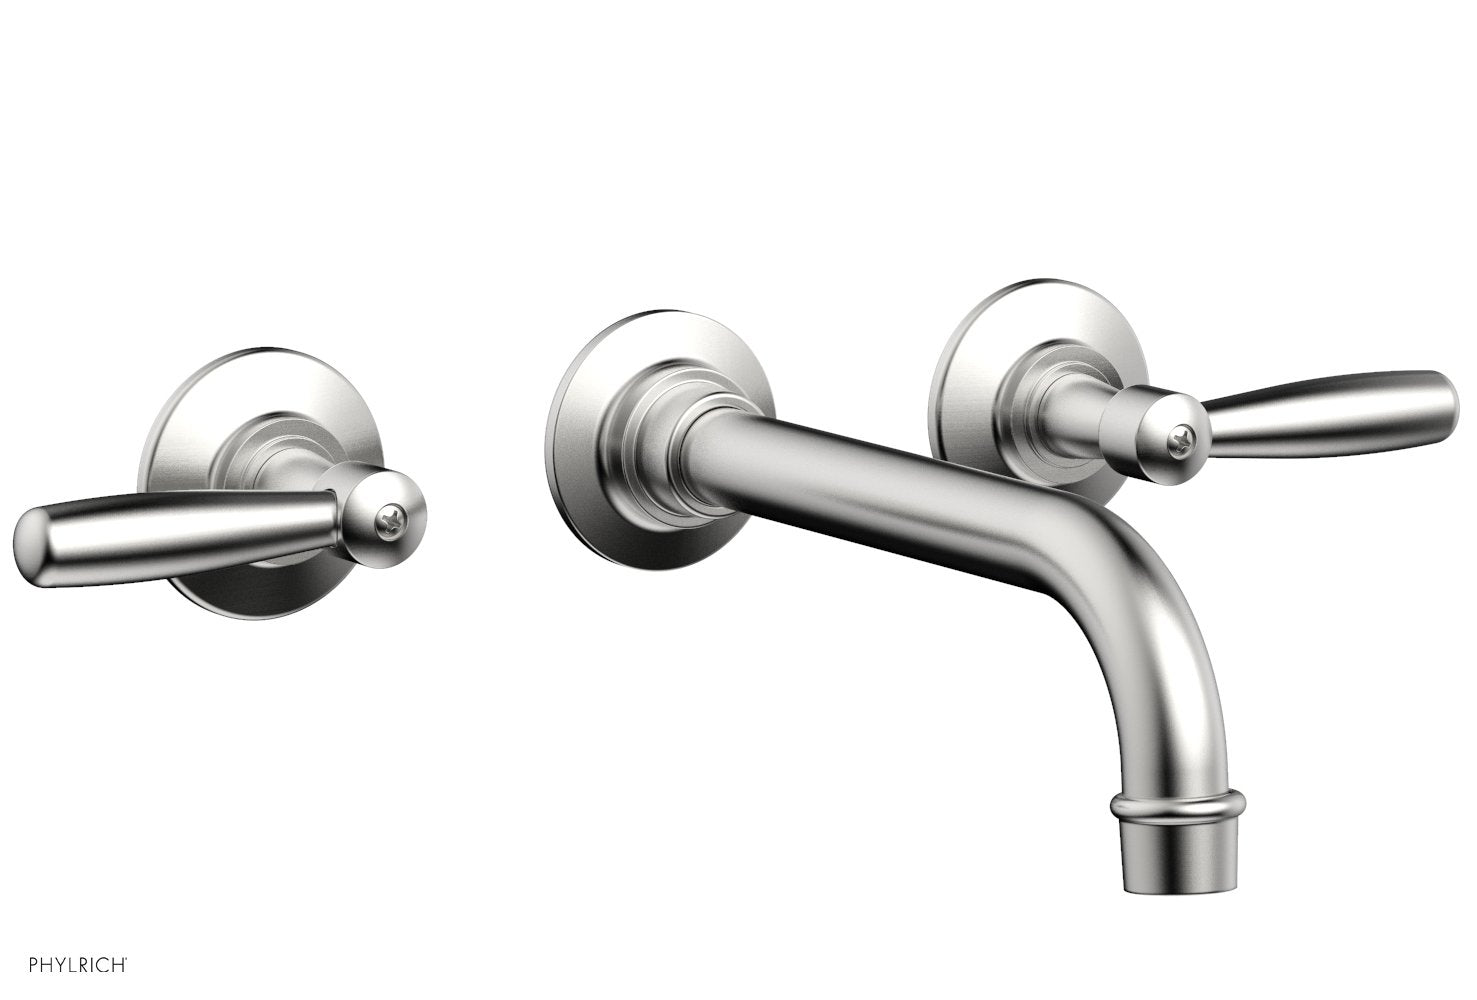 Phylrich WORKS Wall Lavatory Set - Lever Handles